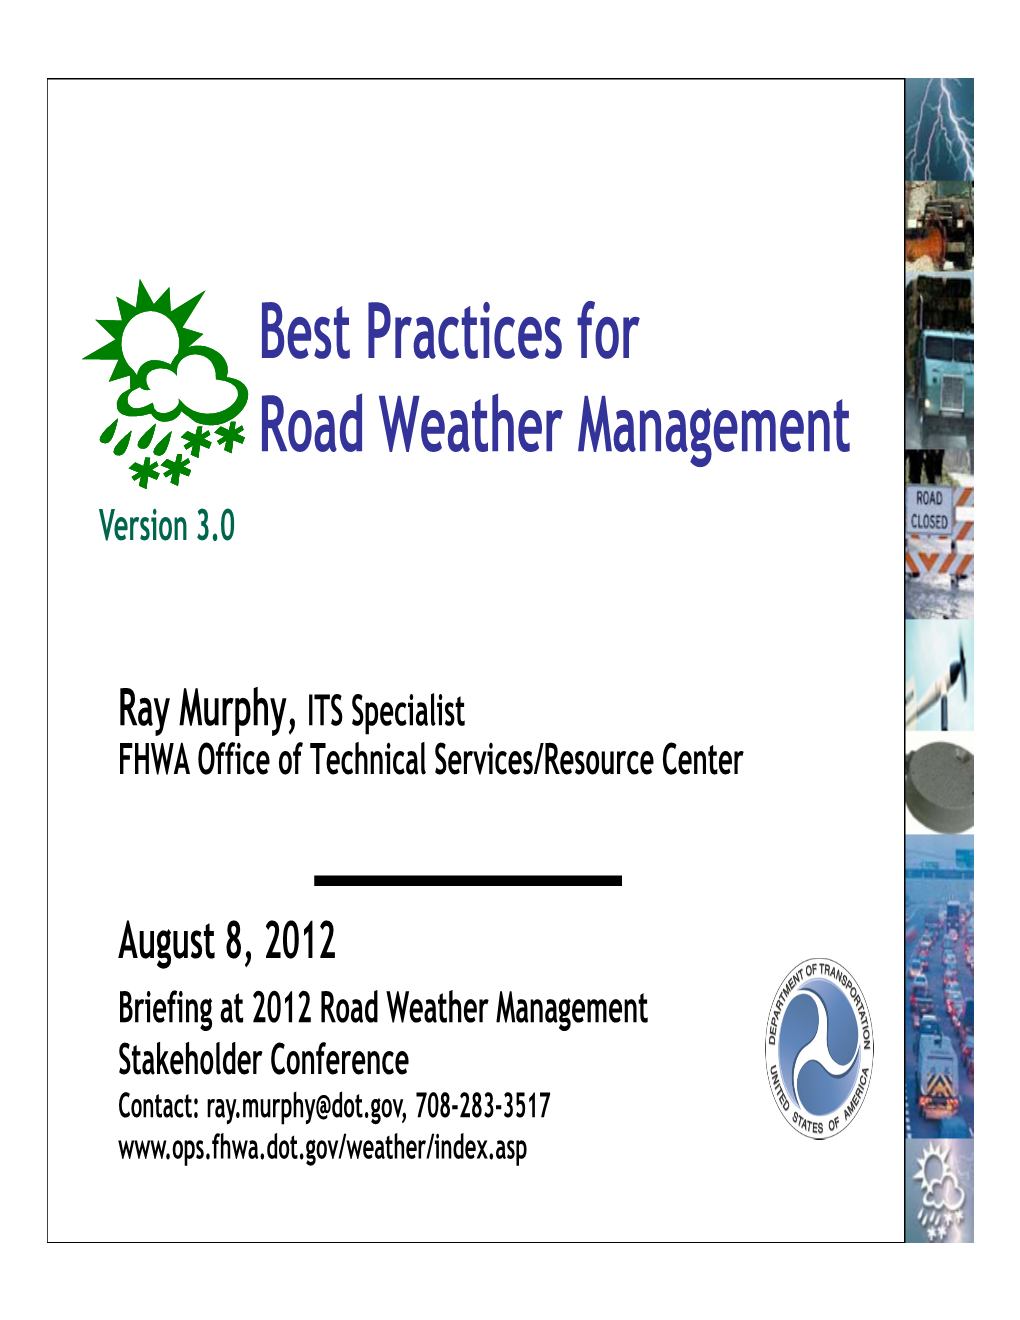 Best Practices for Road Weather Management Version 3.0